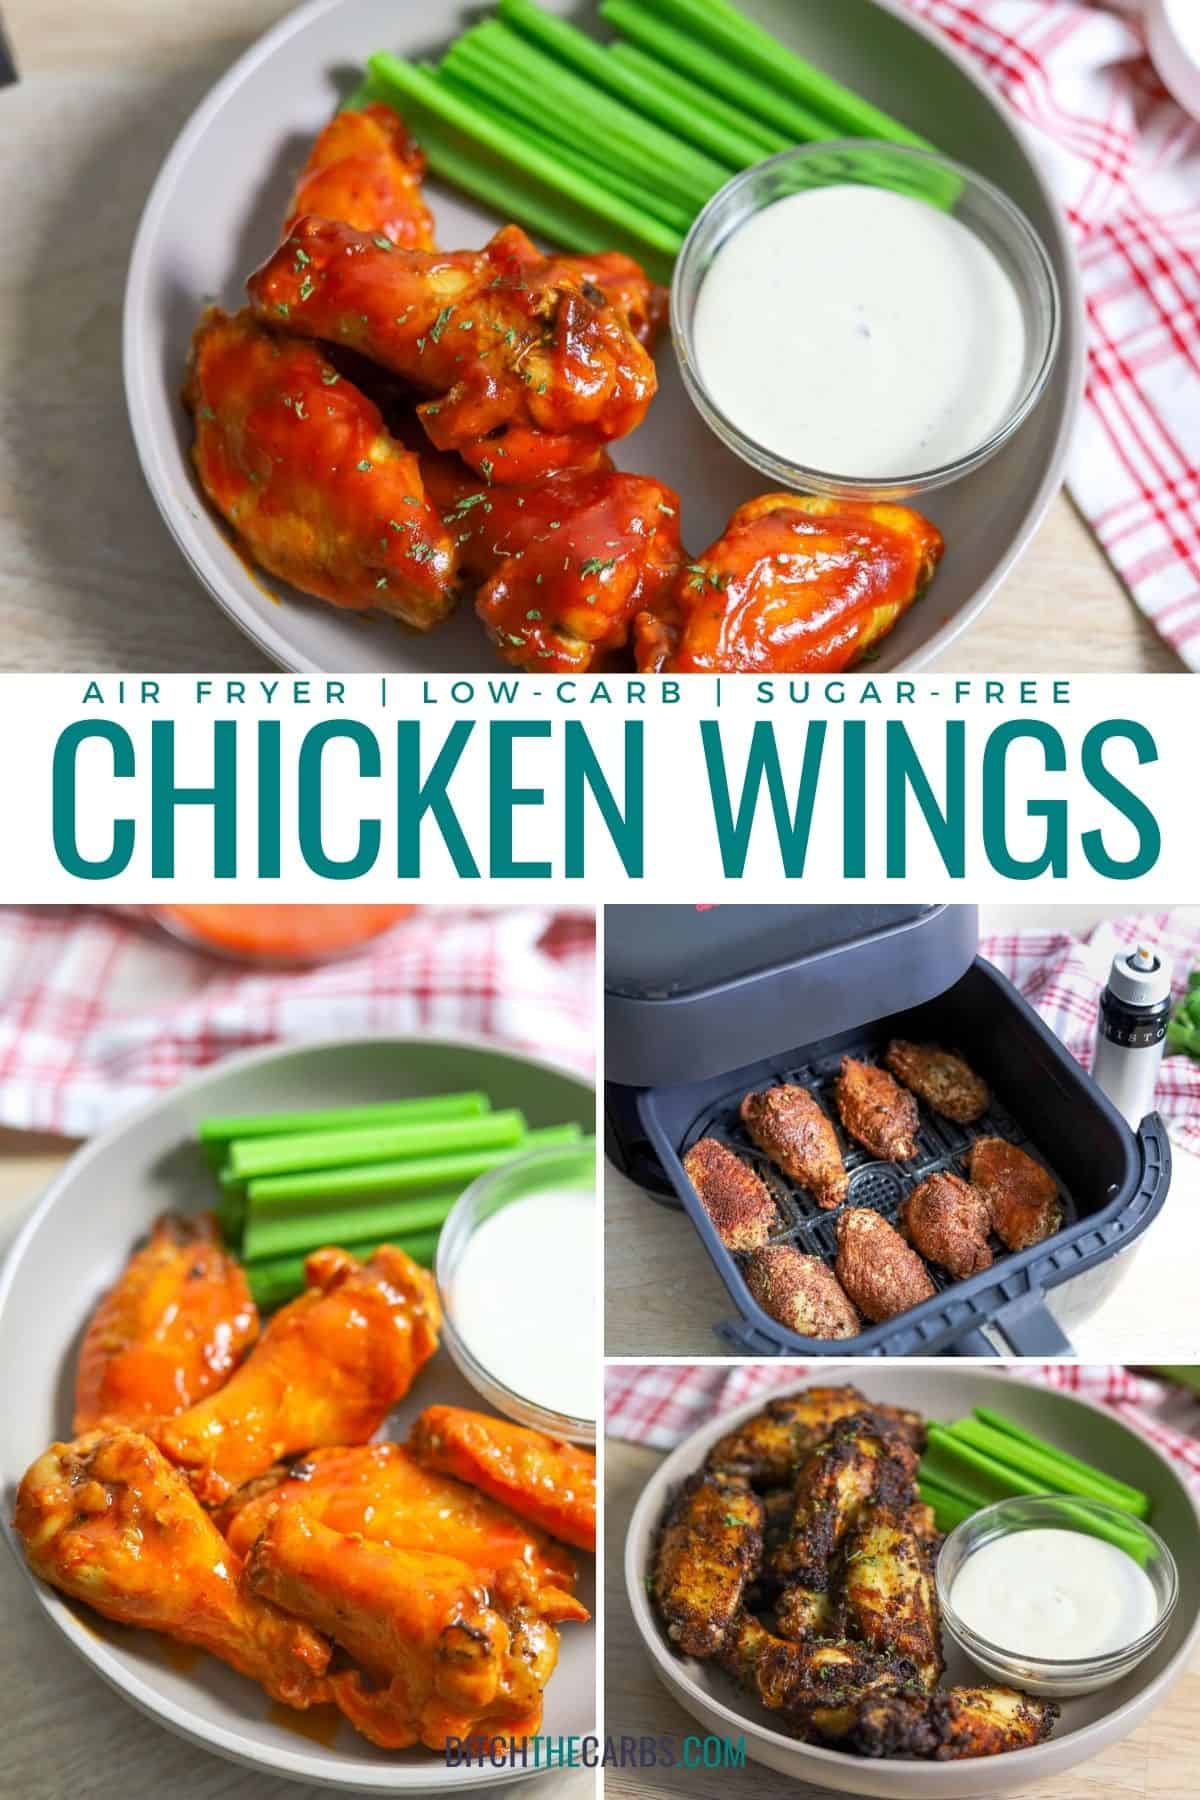 Low Carb, Sugar Free, Keto Friendly Air Fryer Wings Collage